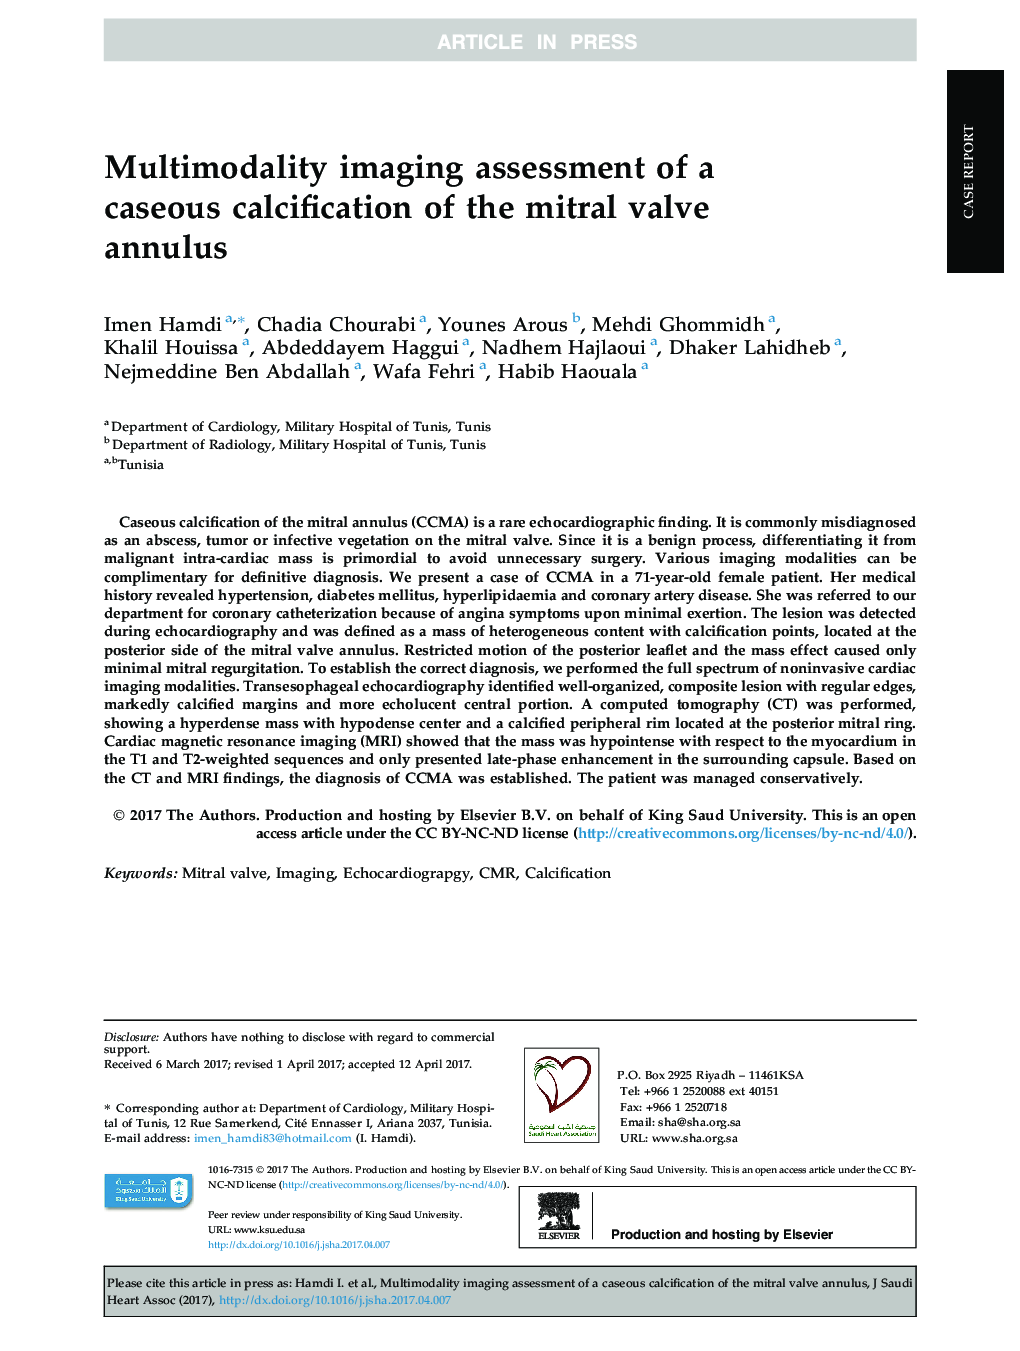 Multimodality imaging assessment of a caseous calcification of the mitral valve annulus